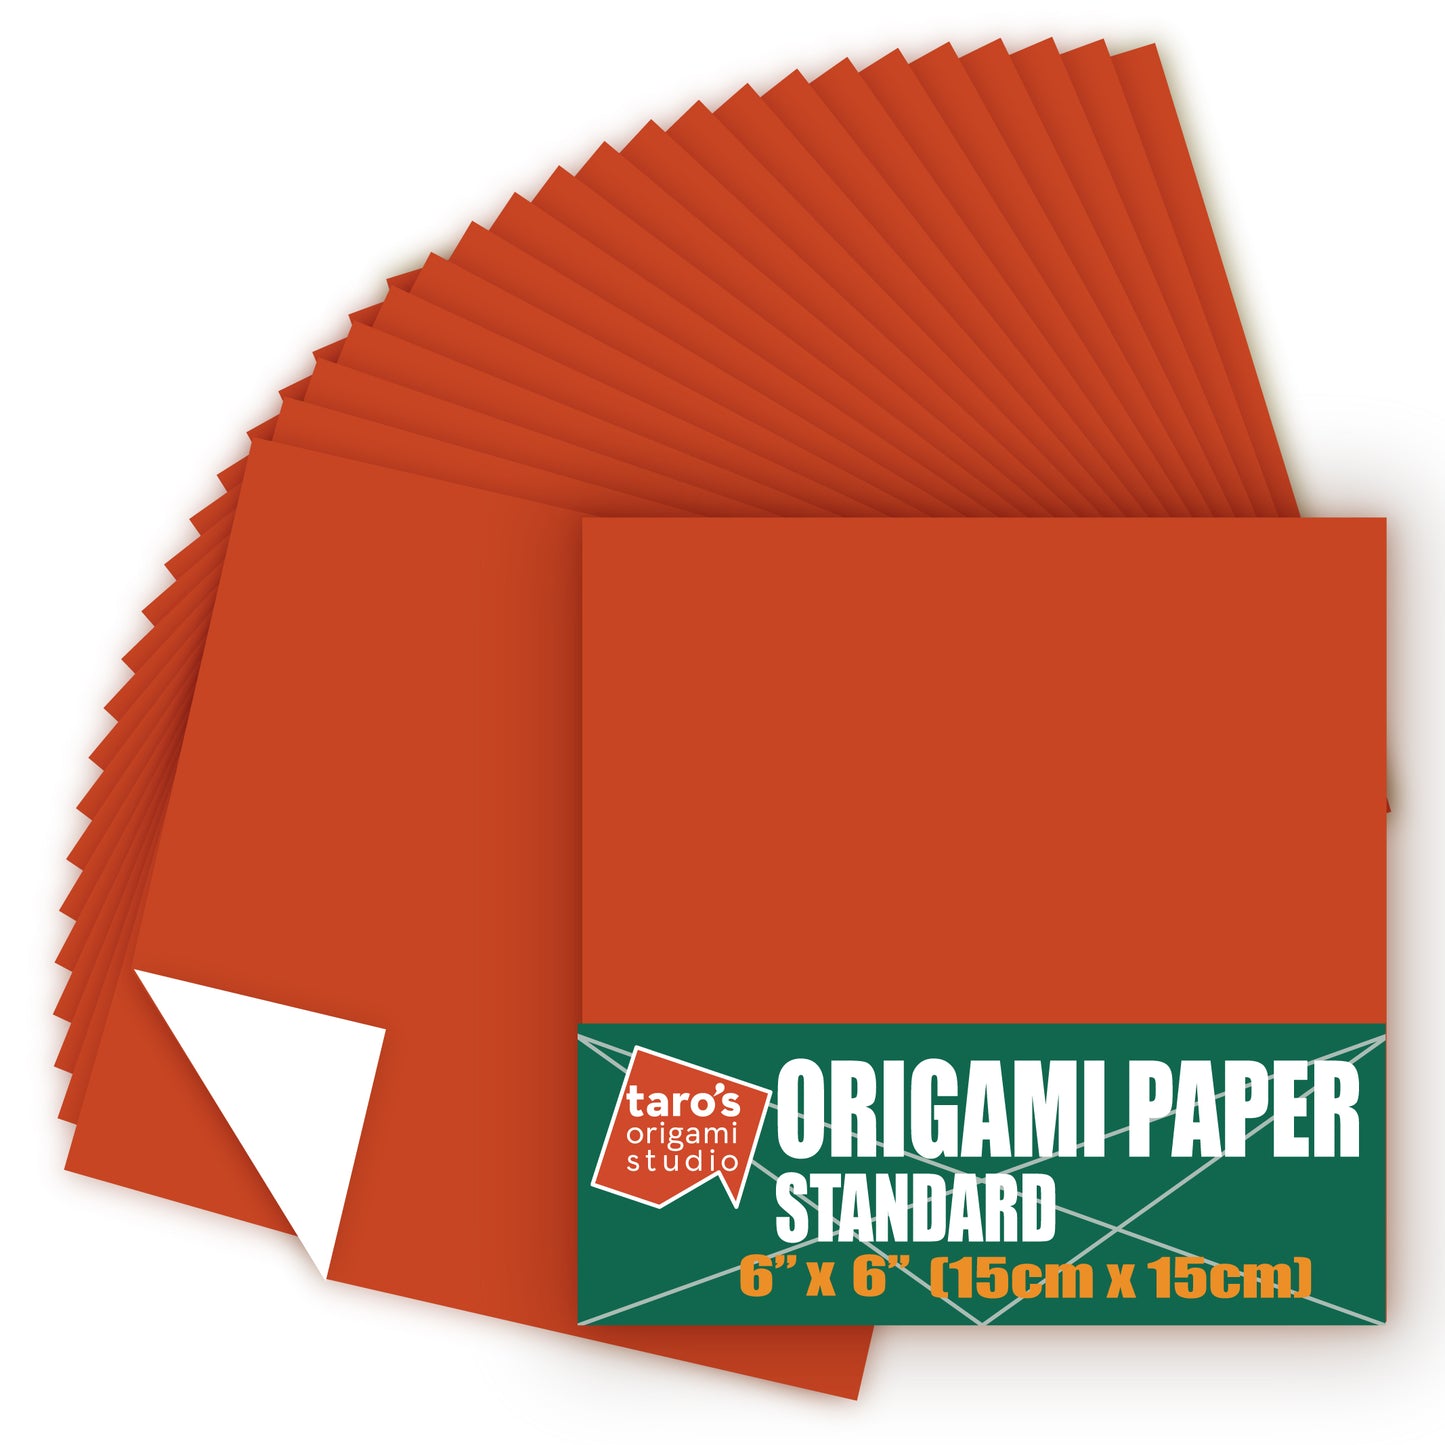 Standard 6 Inch One Sided Single Color (Brick Red) 50 Sheets (All Same Color) Square Easy Fold Premium Japanese Paper for Beginner (Made in Japan)